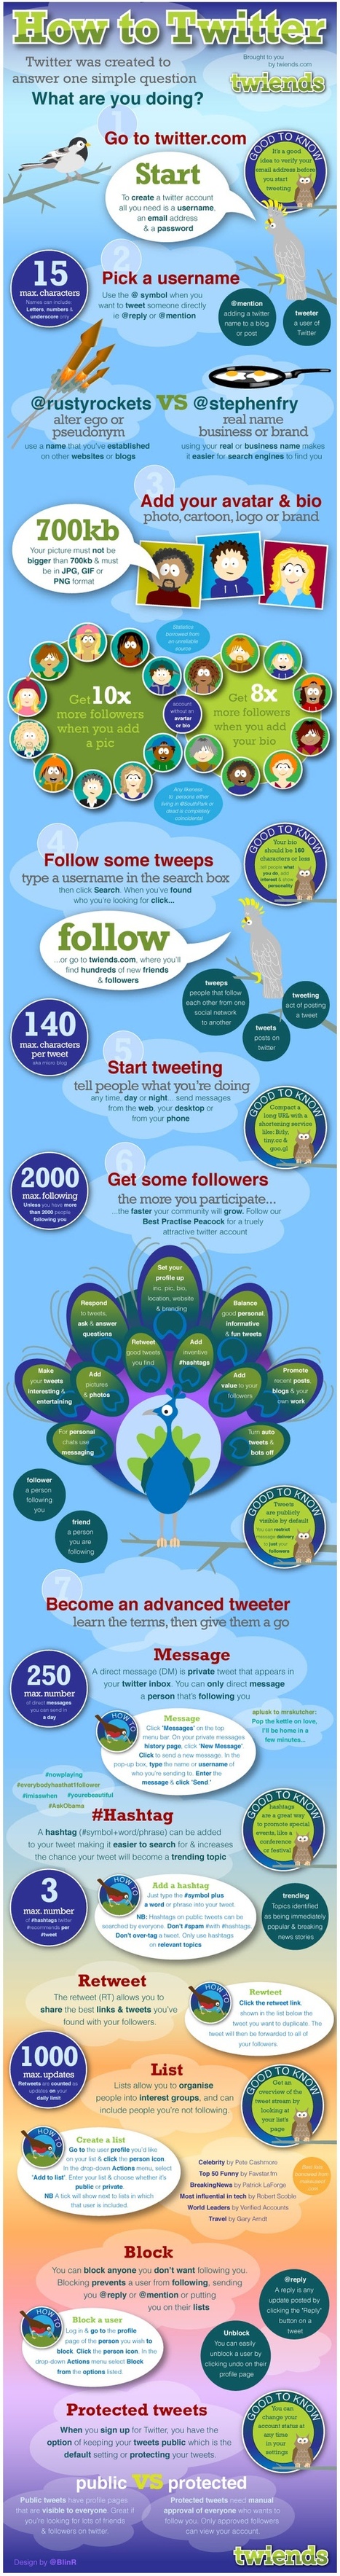 How to Twitter in 60 Seconds [Infographic] | Social Media and its influence | Scoop.it